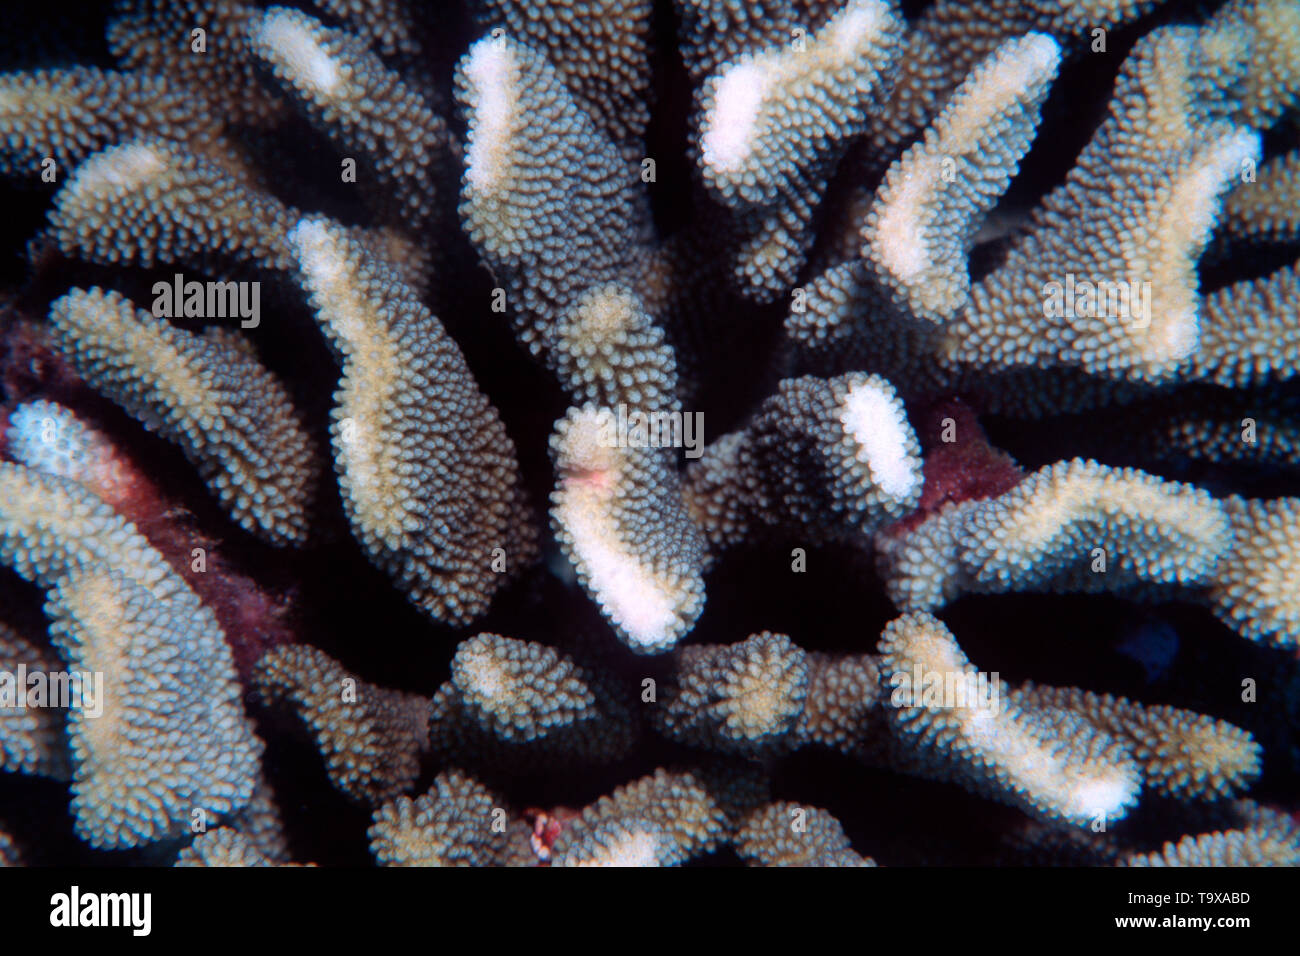 Pocillopora coral, Rongelap, Marshall Islands (N. Pacific) Stock Photo